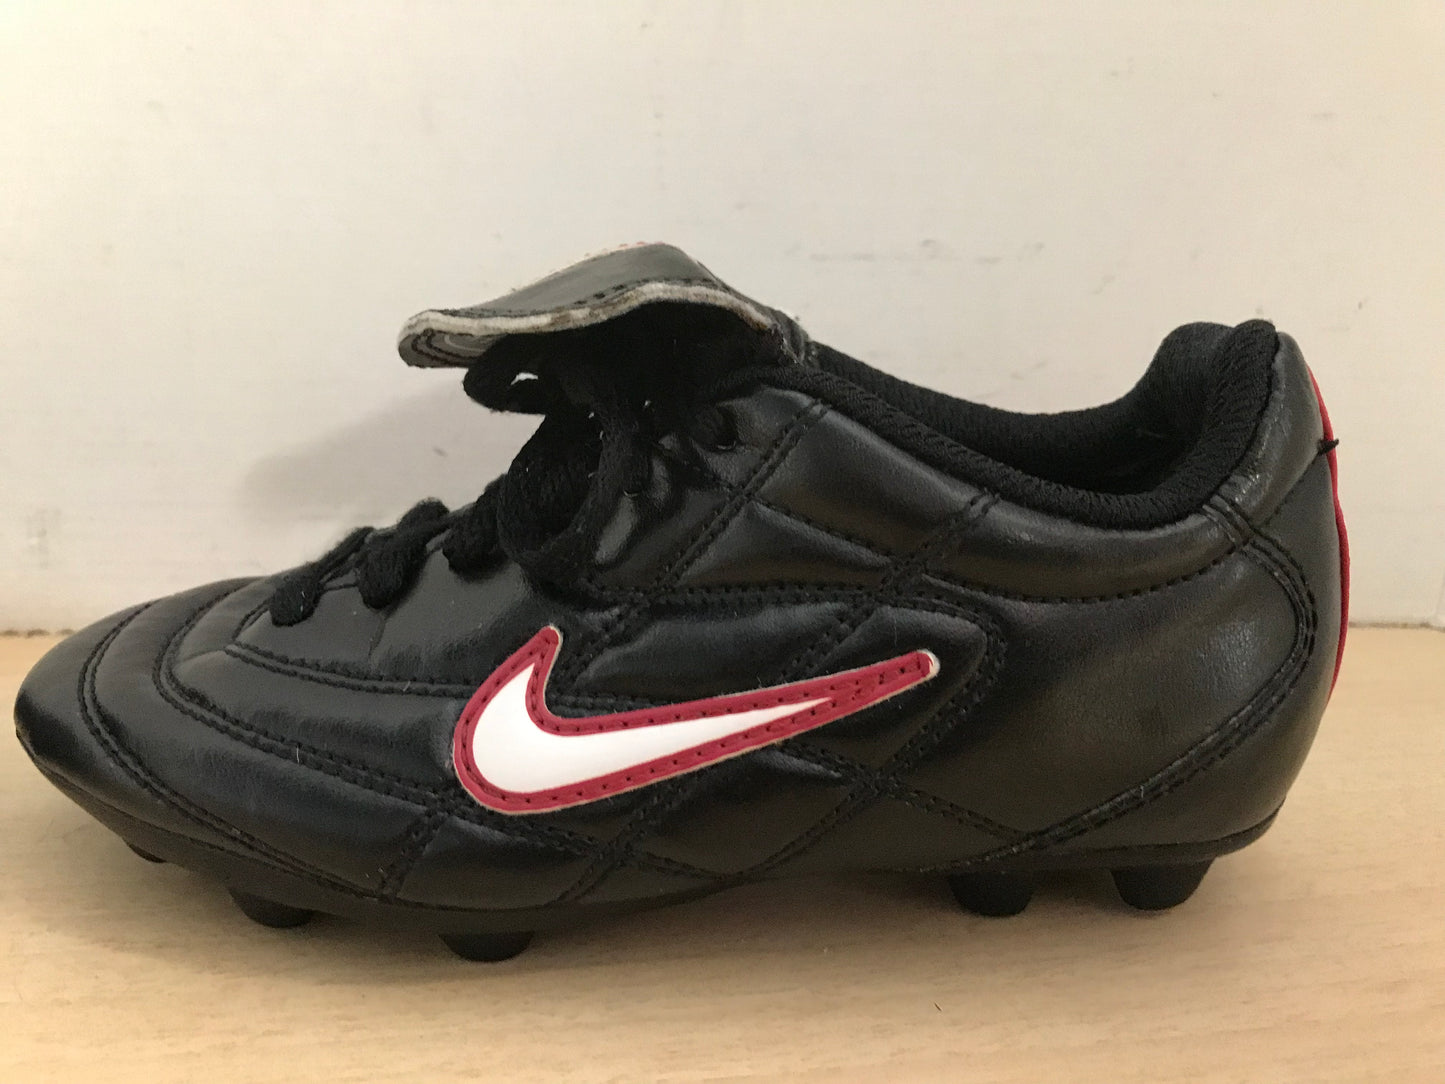 Soccer Shoes Cleats Child Size 12 Nike Red Black